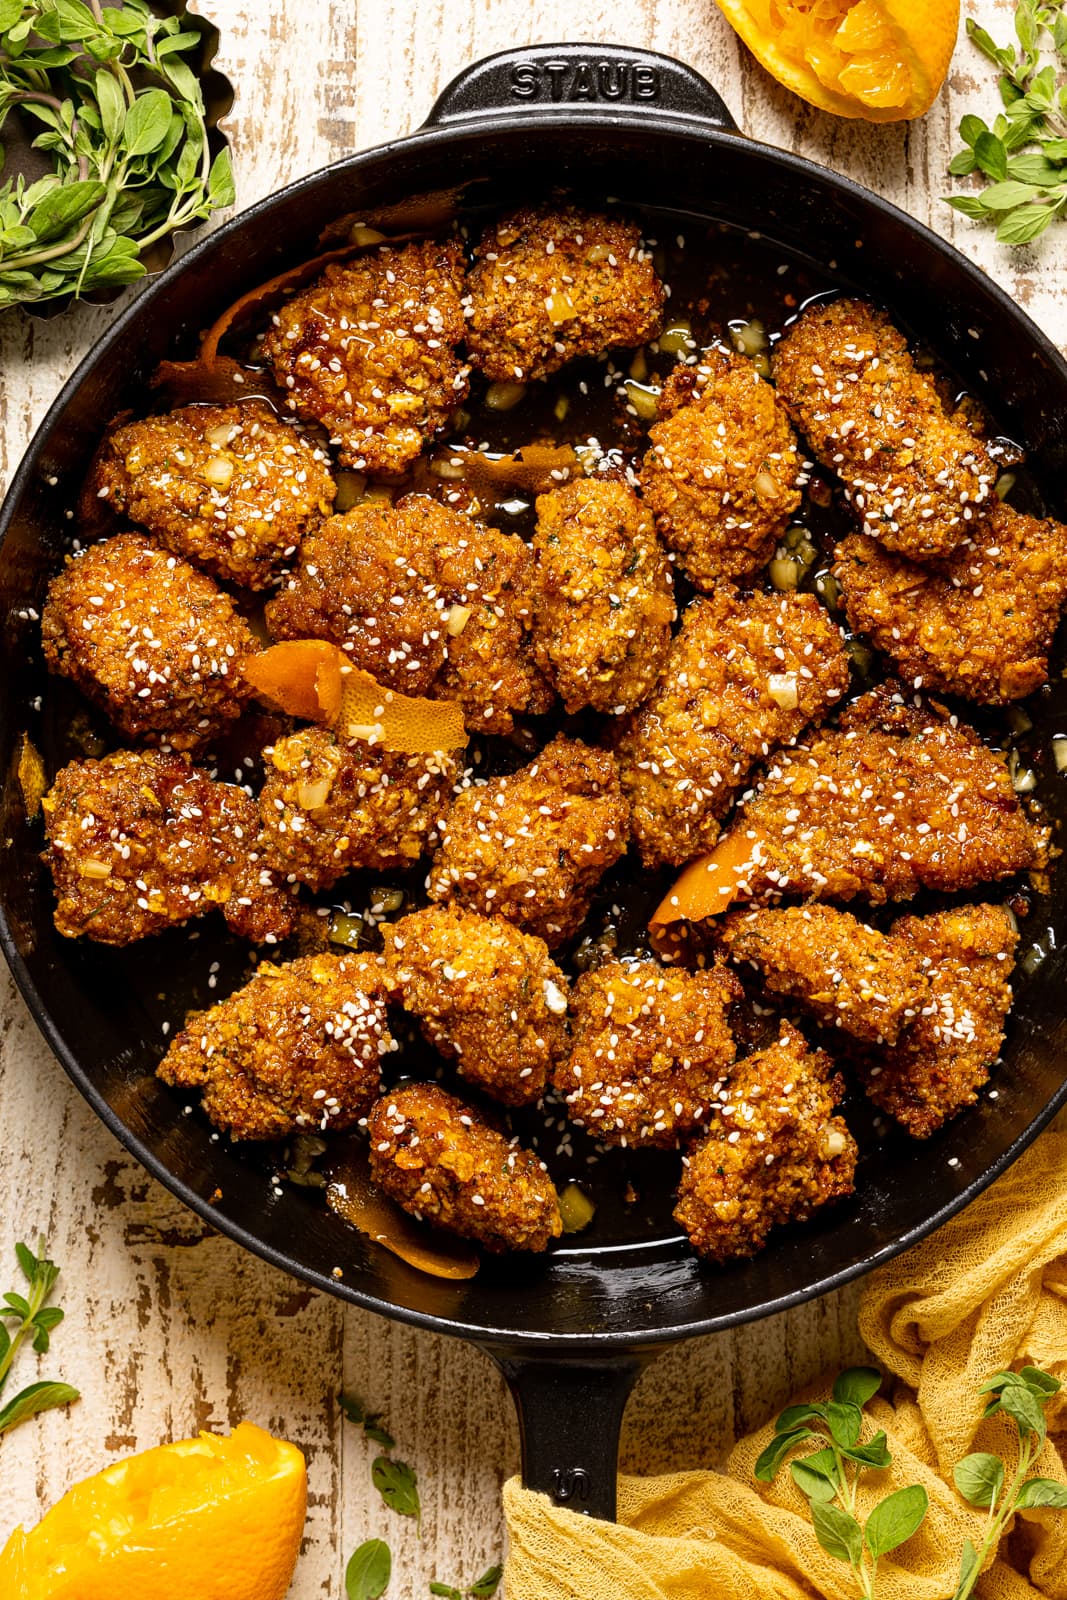 Popcorn chicken in a black skillet on a white wood table with oranges and herbs.